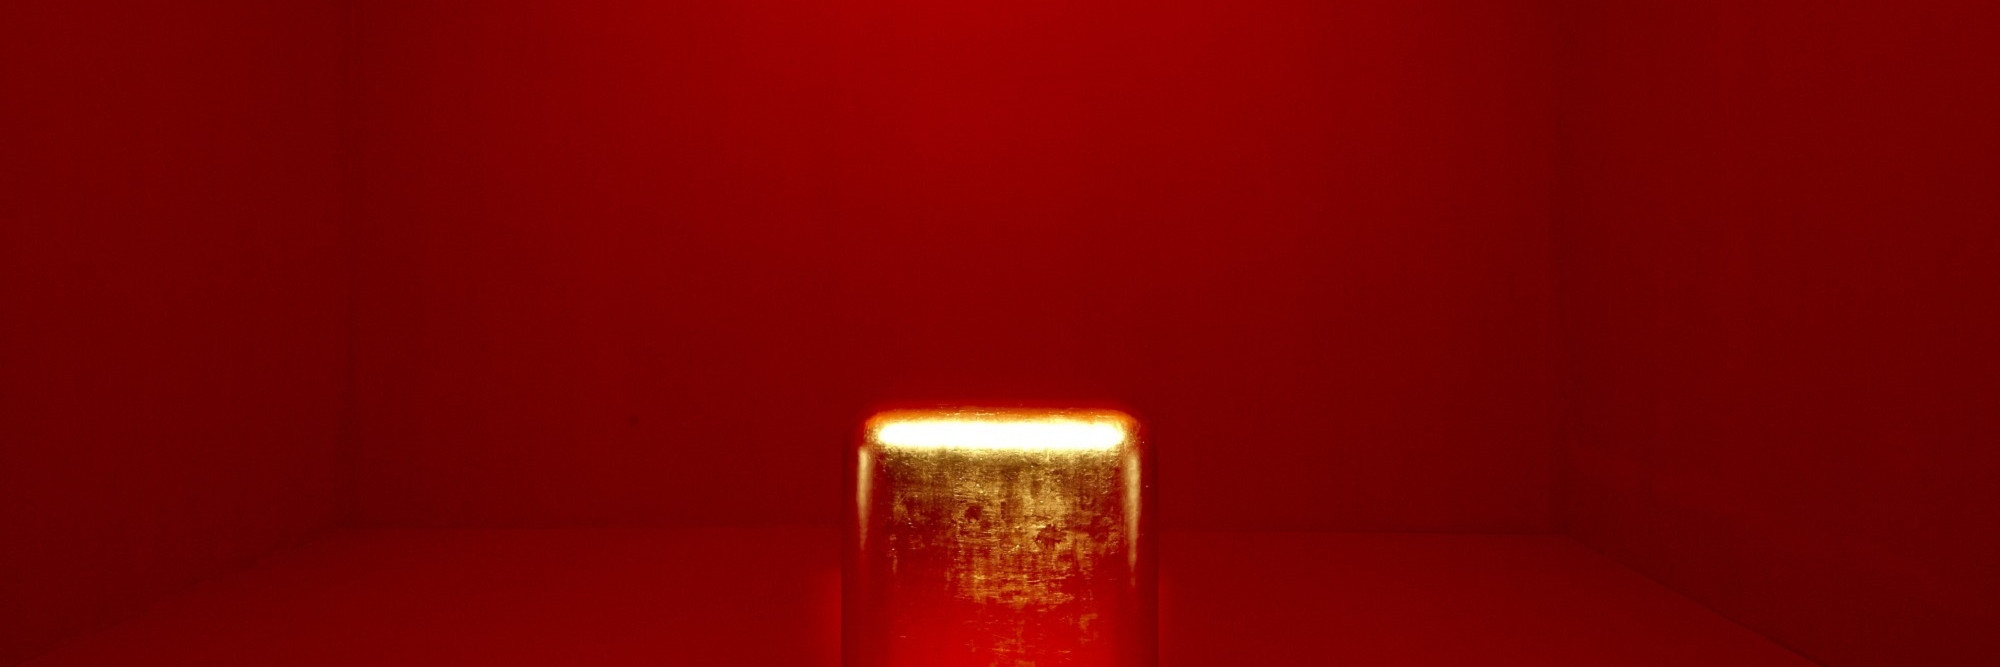 James Lee Byars, The Table of Perfect, 1989. The Museum of Modern Art, New York. Committee on Painting and Sculpture Funds. Photo: Matthew Septimus